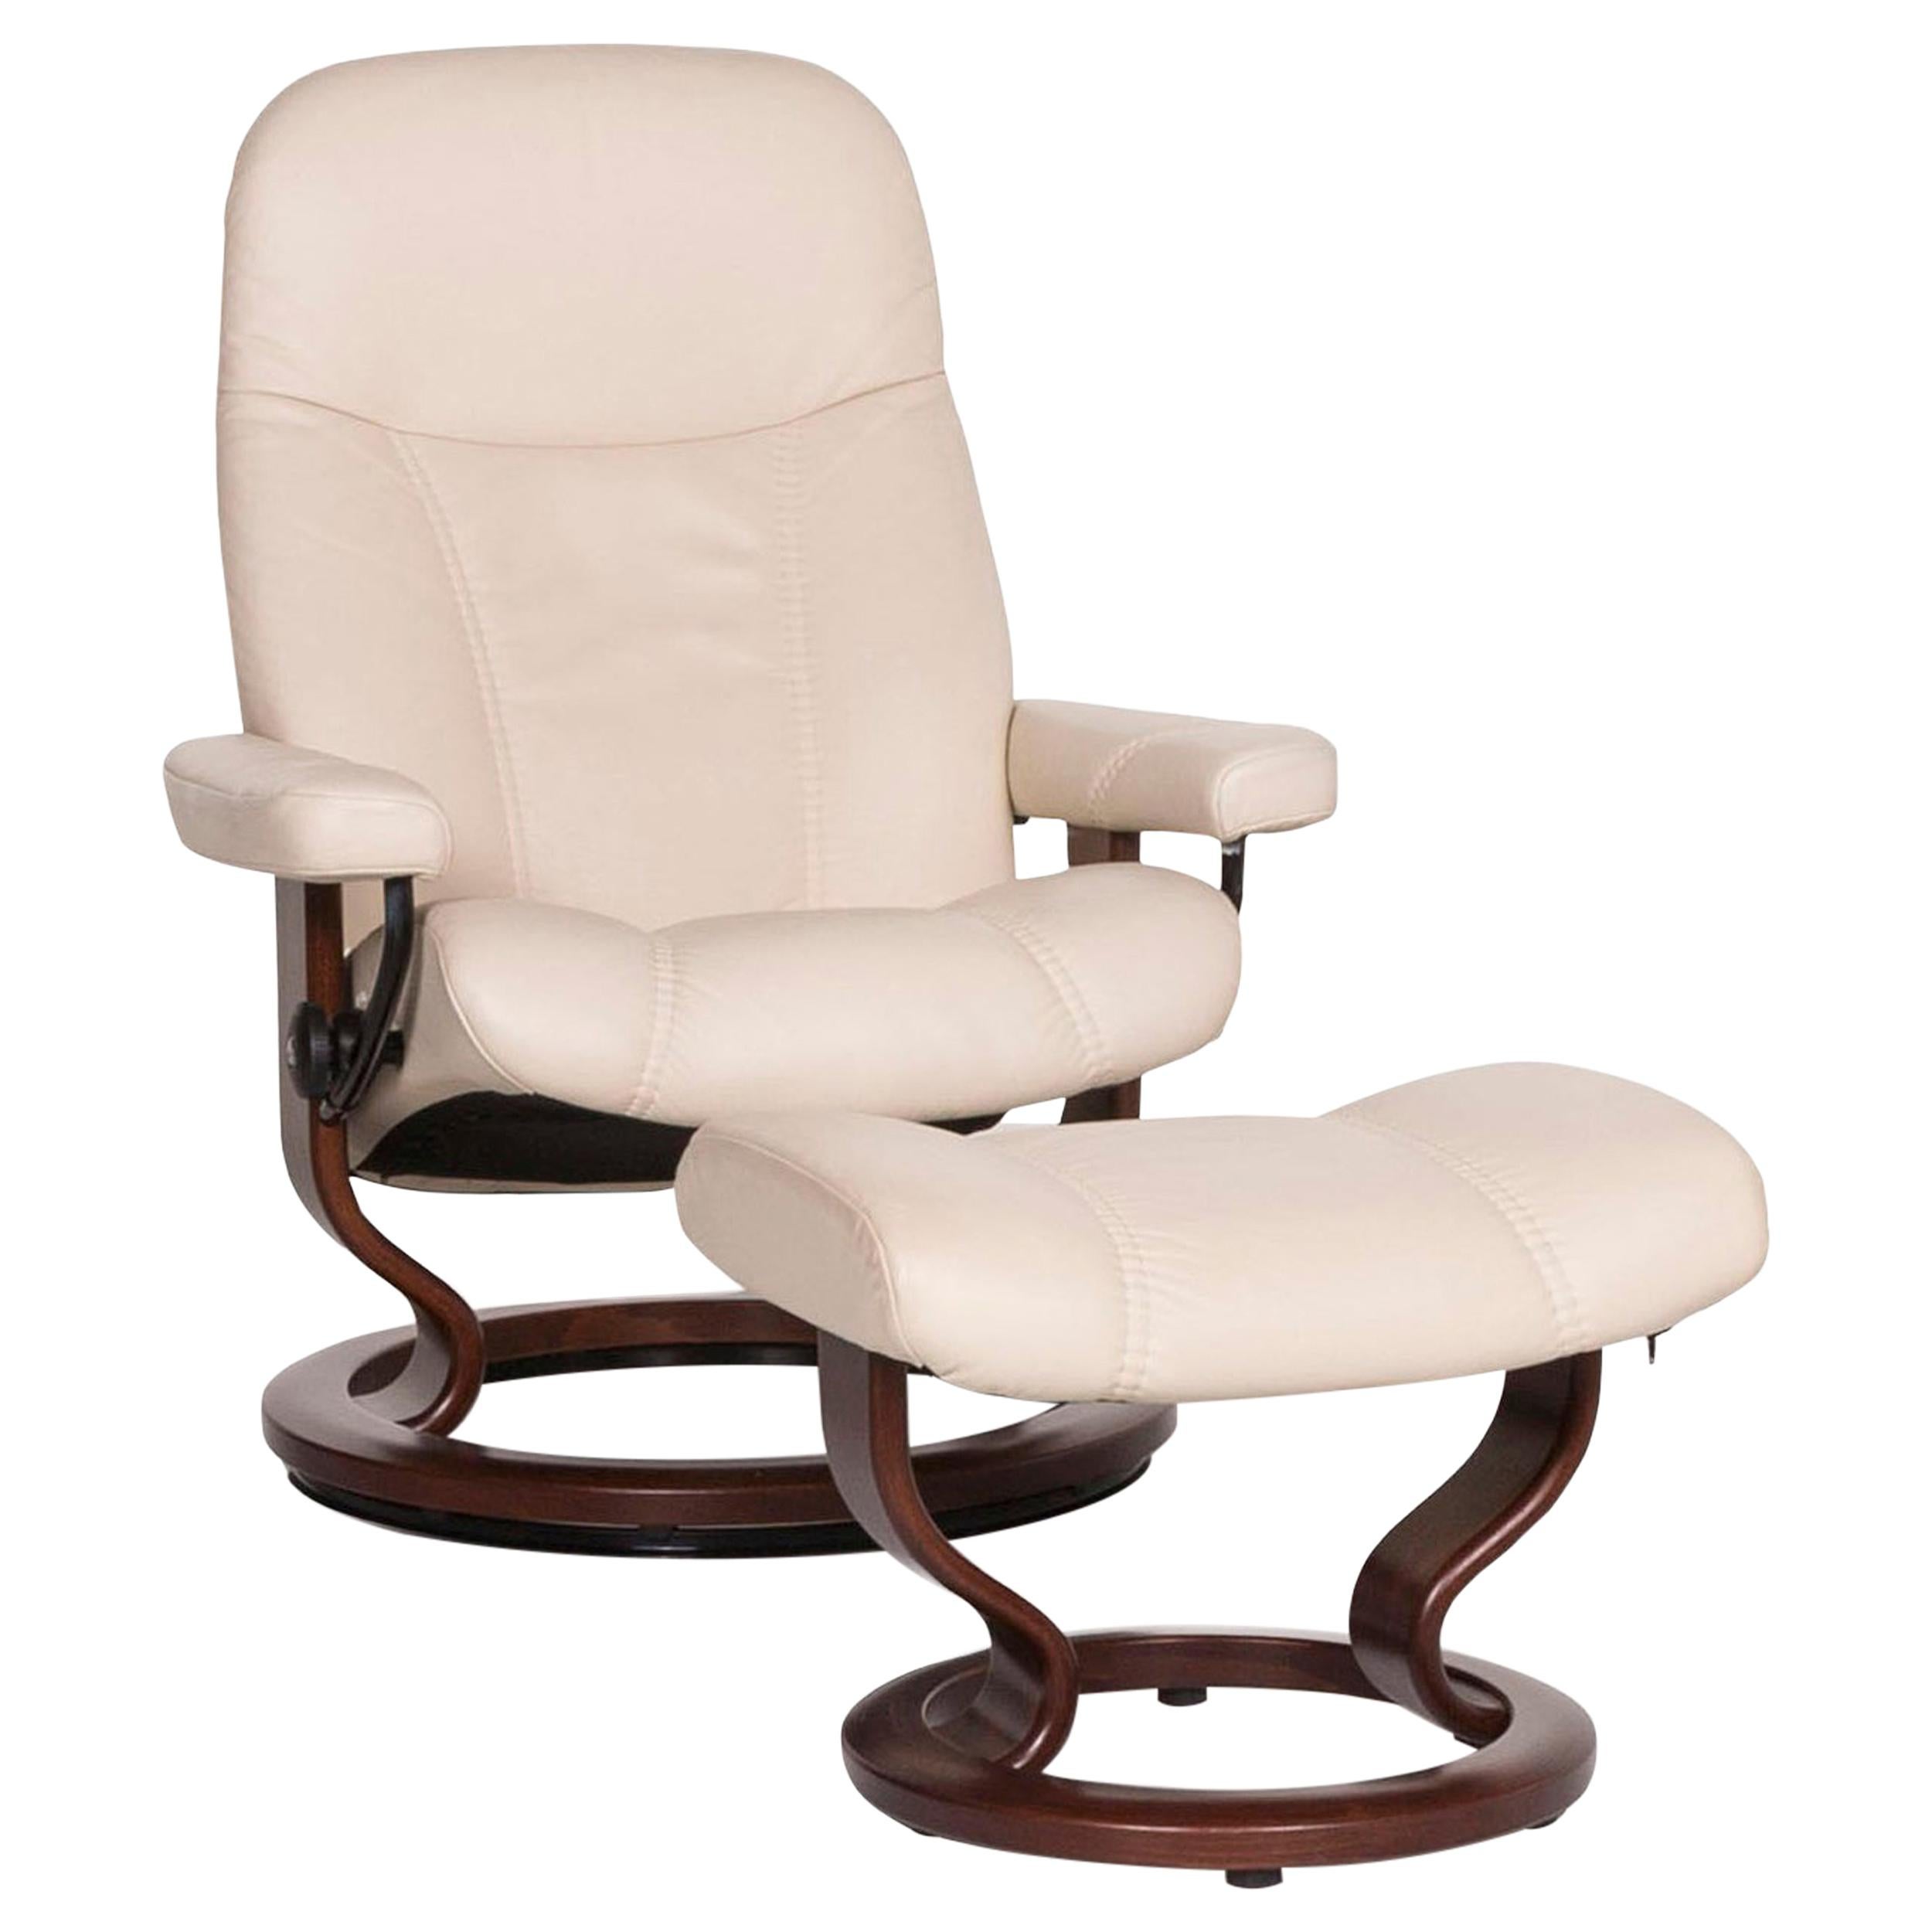 Stressless Consul Leather Armchair Incl. Stool Cream Relax Function Function